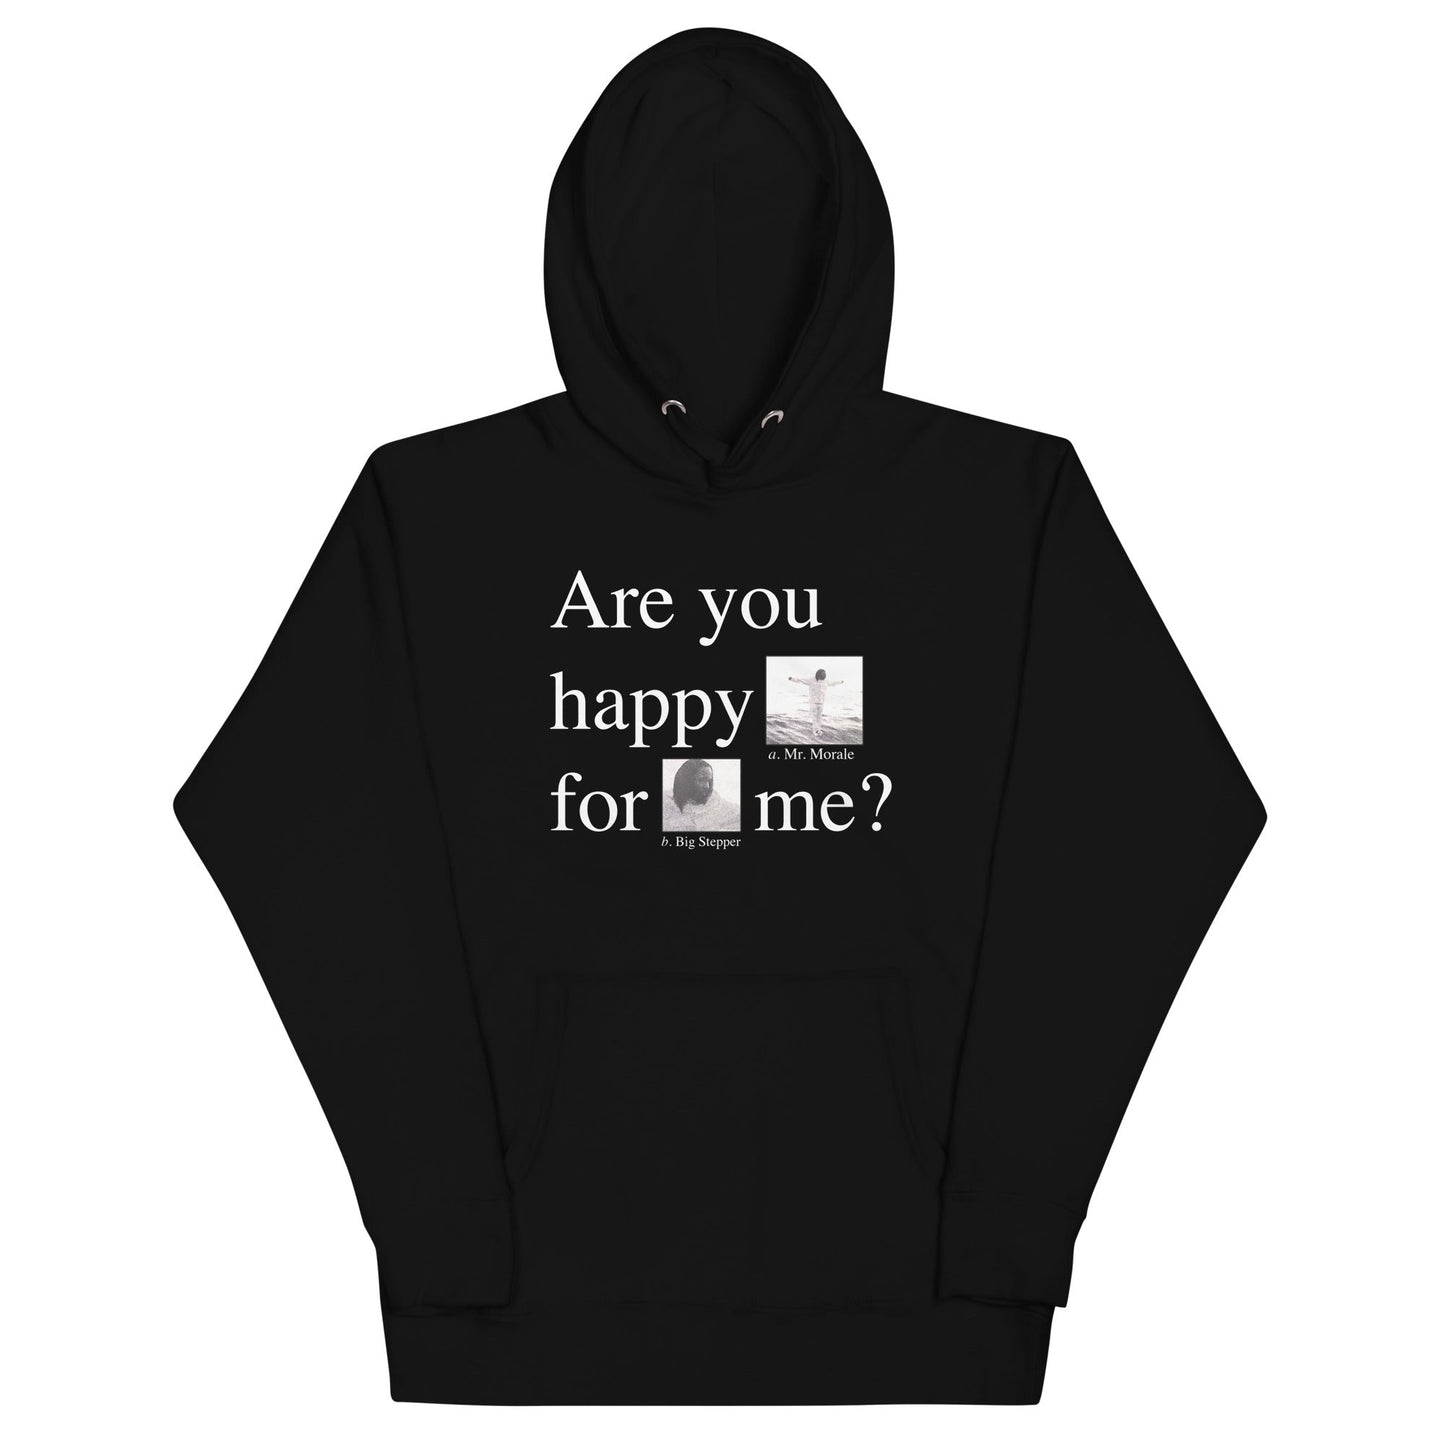 Are you happy for me? - Madonna Celebration Tour Merch Cotton Hoodie